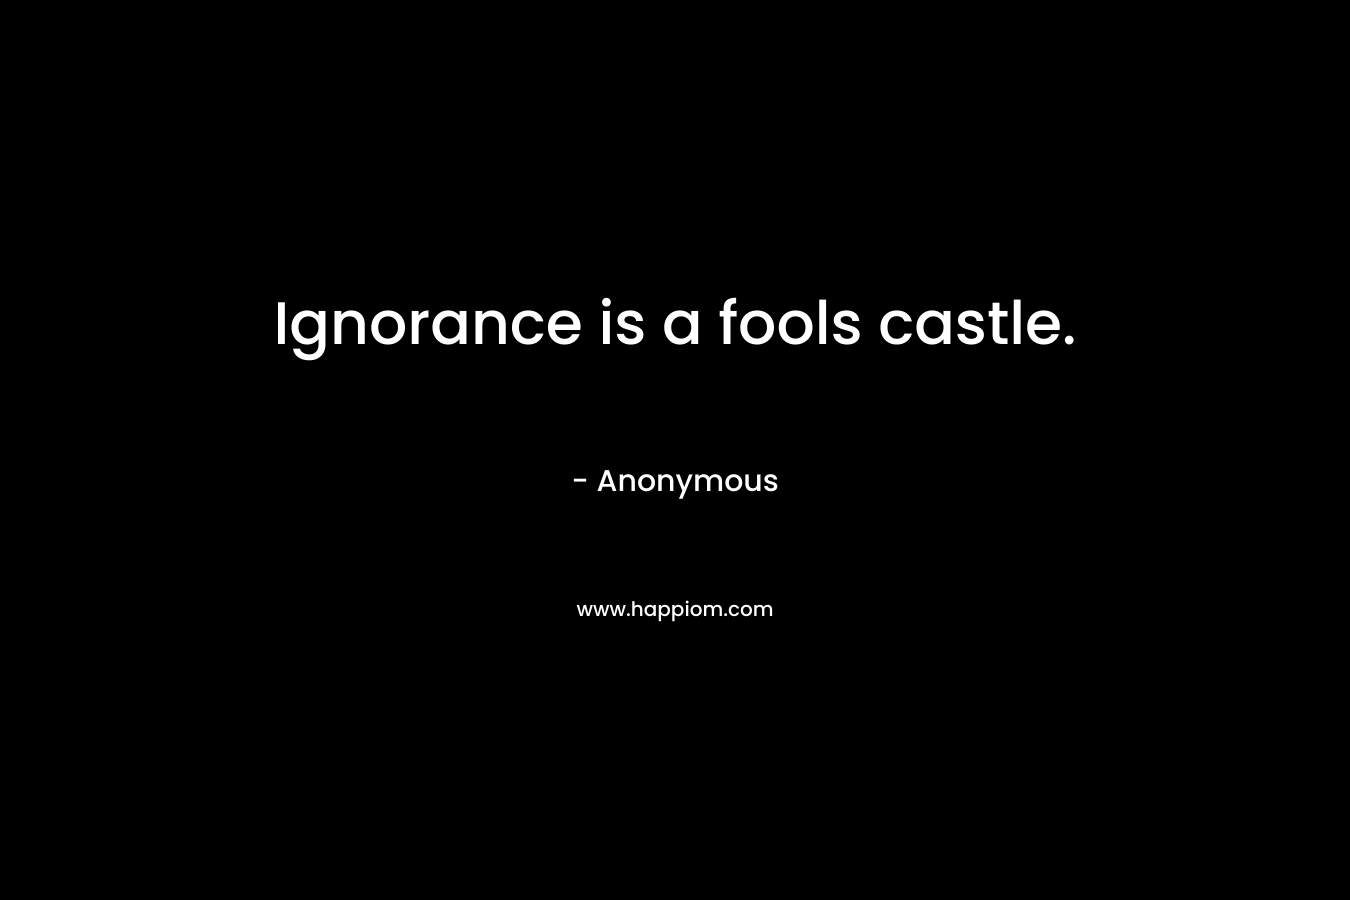 Ignorance is a fools castle.